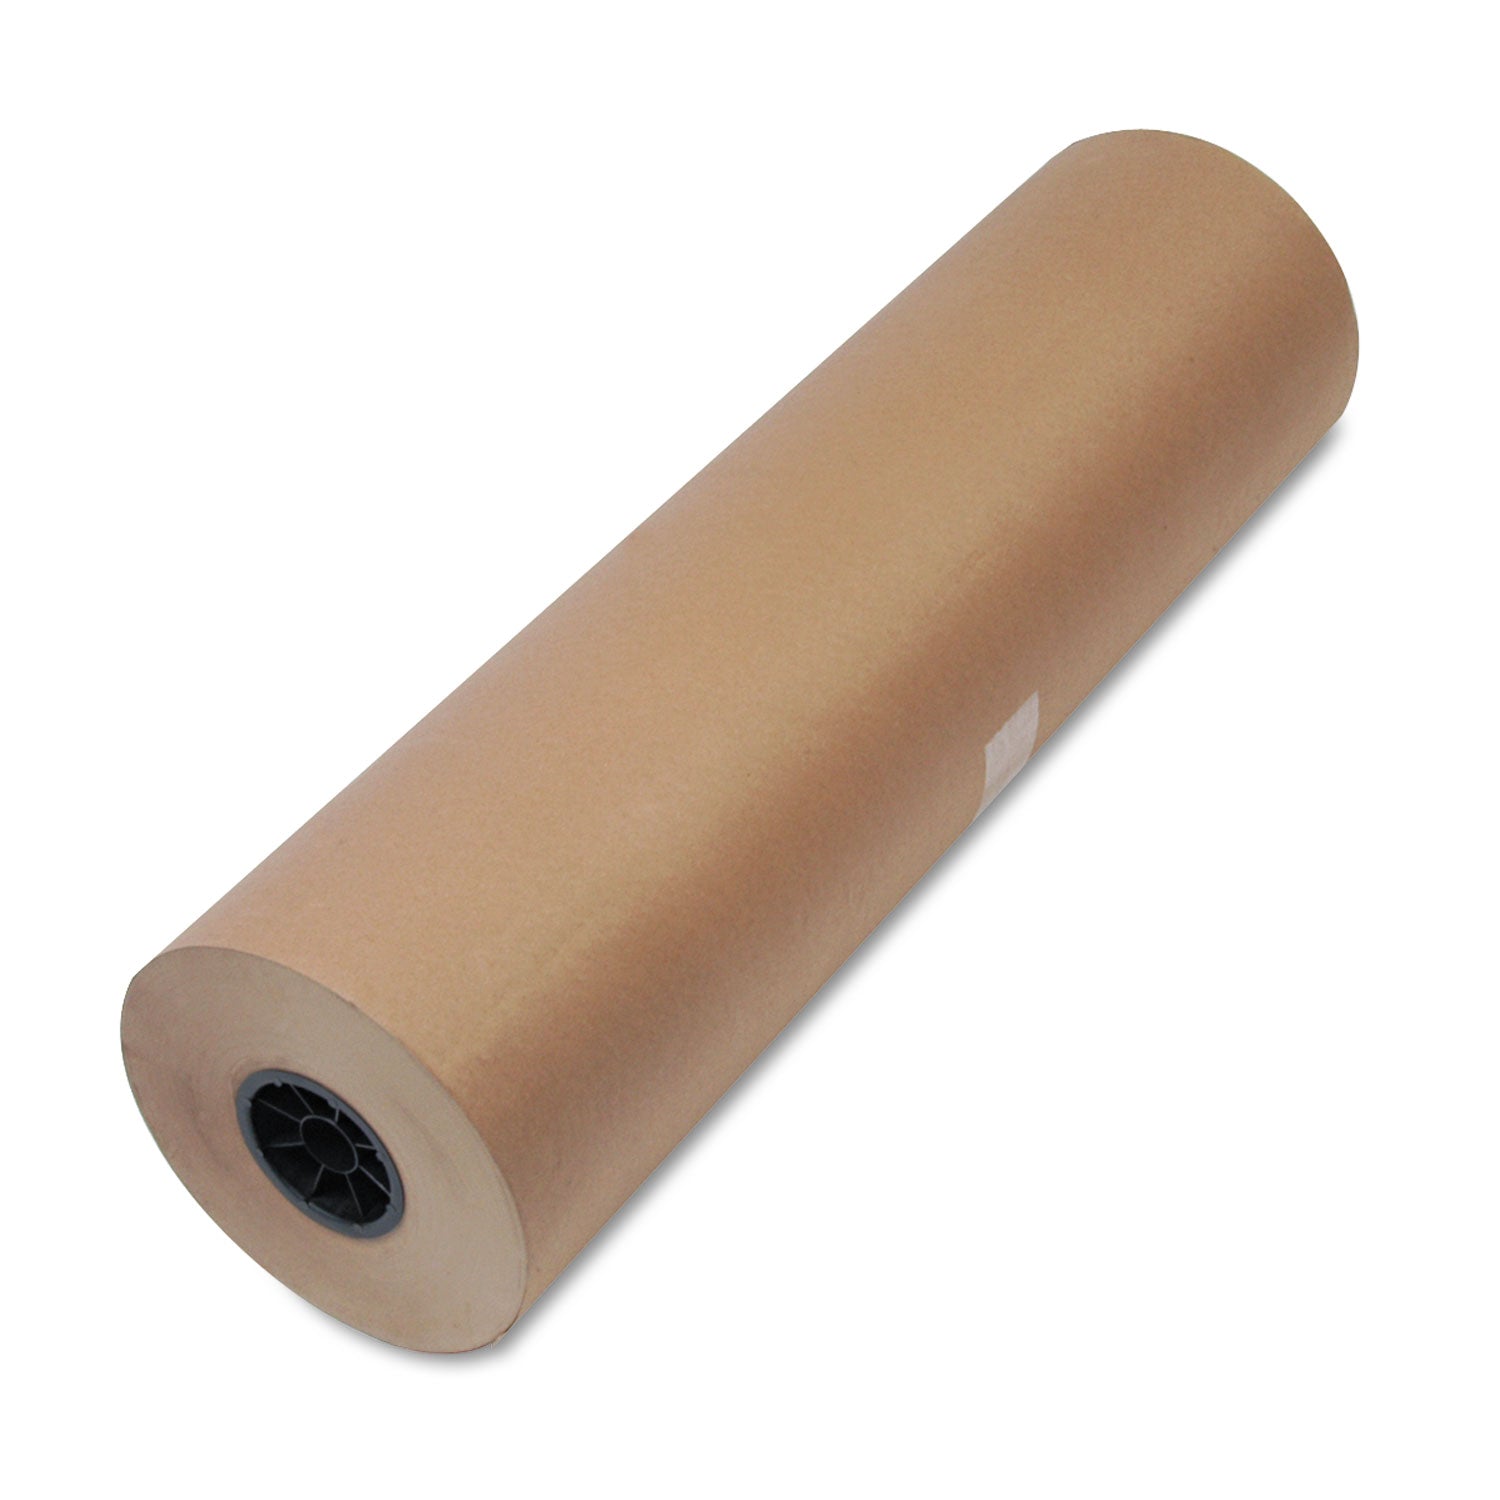 high-volume-heavyweight-wrapping-paper-roll-50-lb-wrapping-weight-stock-30-x-720-ft-brown_unv1300046 - 1